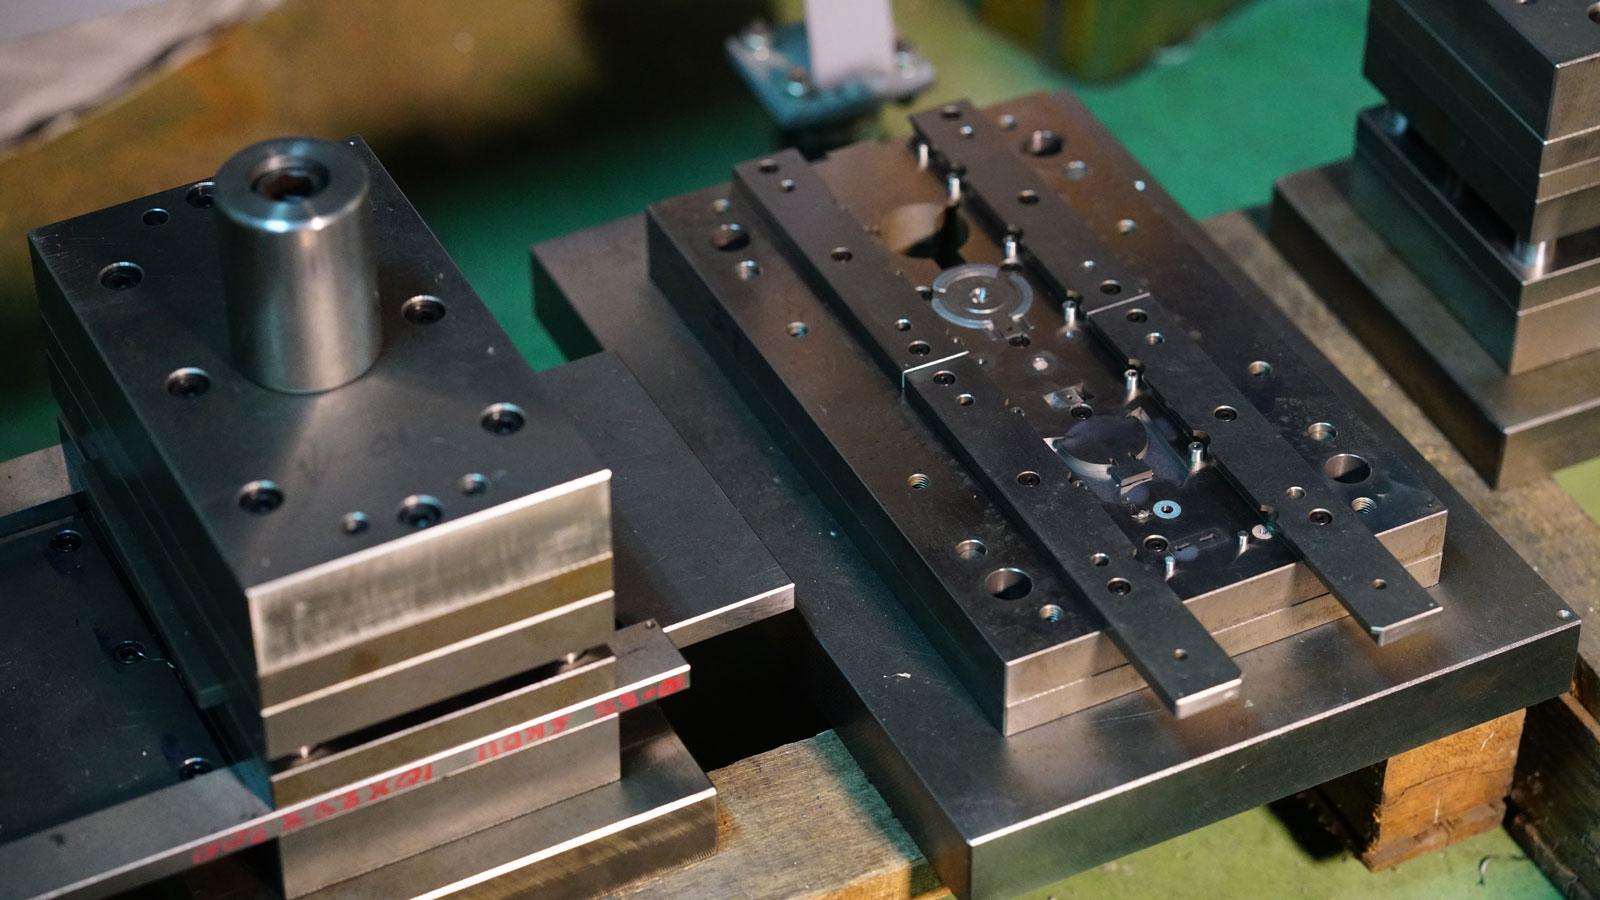 This metal mold produces our patented cylinder, which consists of 20 clutch systems to pluck the 20-note comb. Each clutch system is made of 6 small parts. If you want to learn more about our patented cylinder design, welcome to watch this video: https://youtu.be/oiUjaVkSRZU